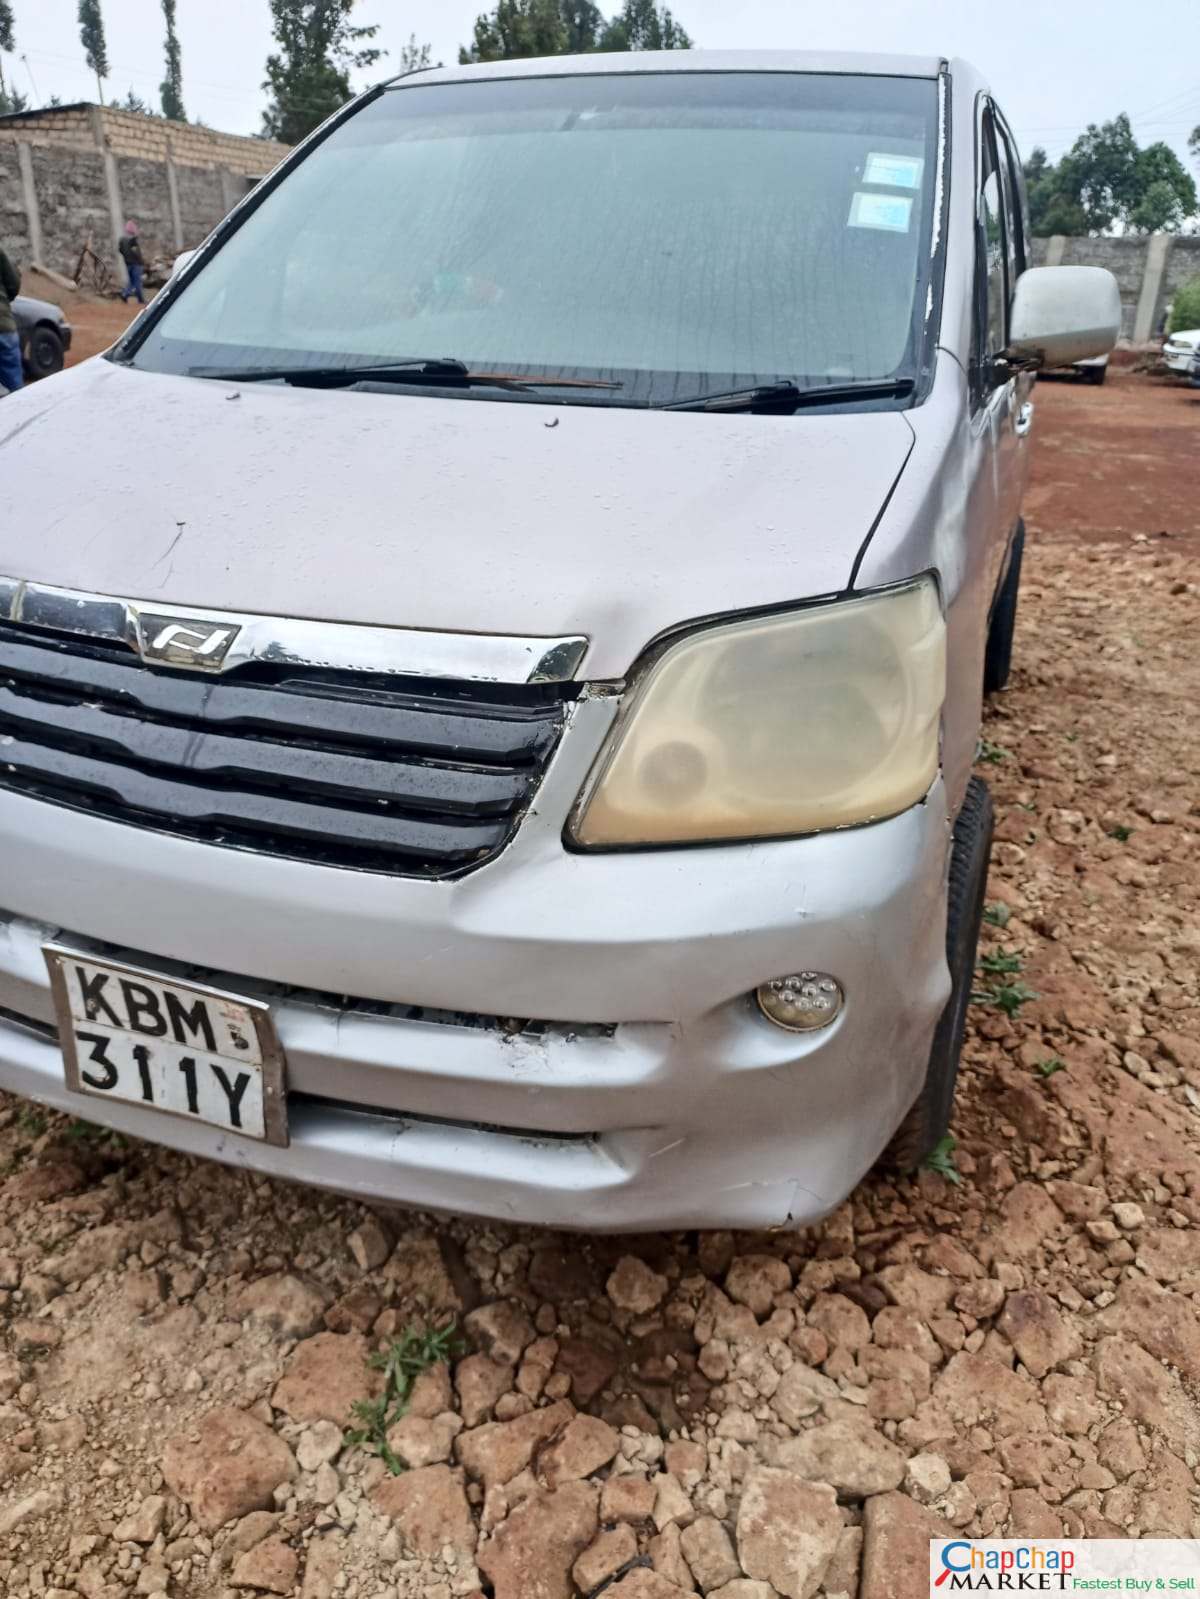 Toyota NOAH for sale in Kenya 340k ONLY You Pay 30% Deposit Trade in OK EXCLUSIVE HIRE PURCHASE INSTALLMENTS